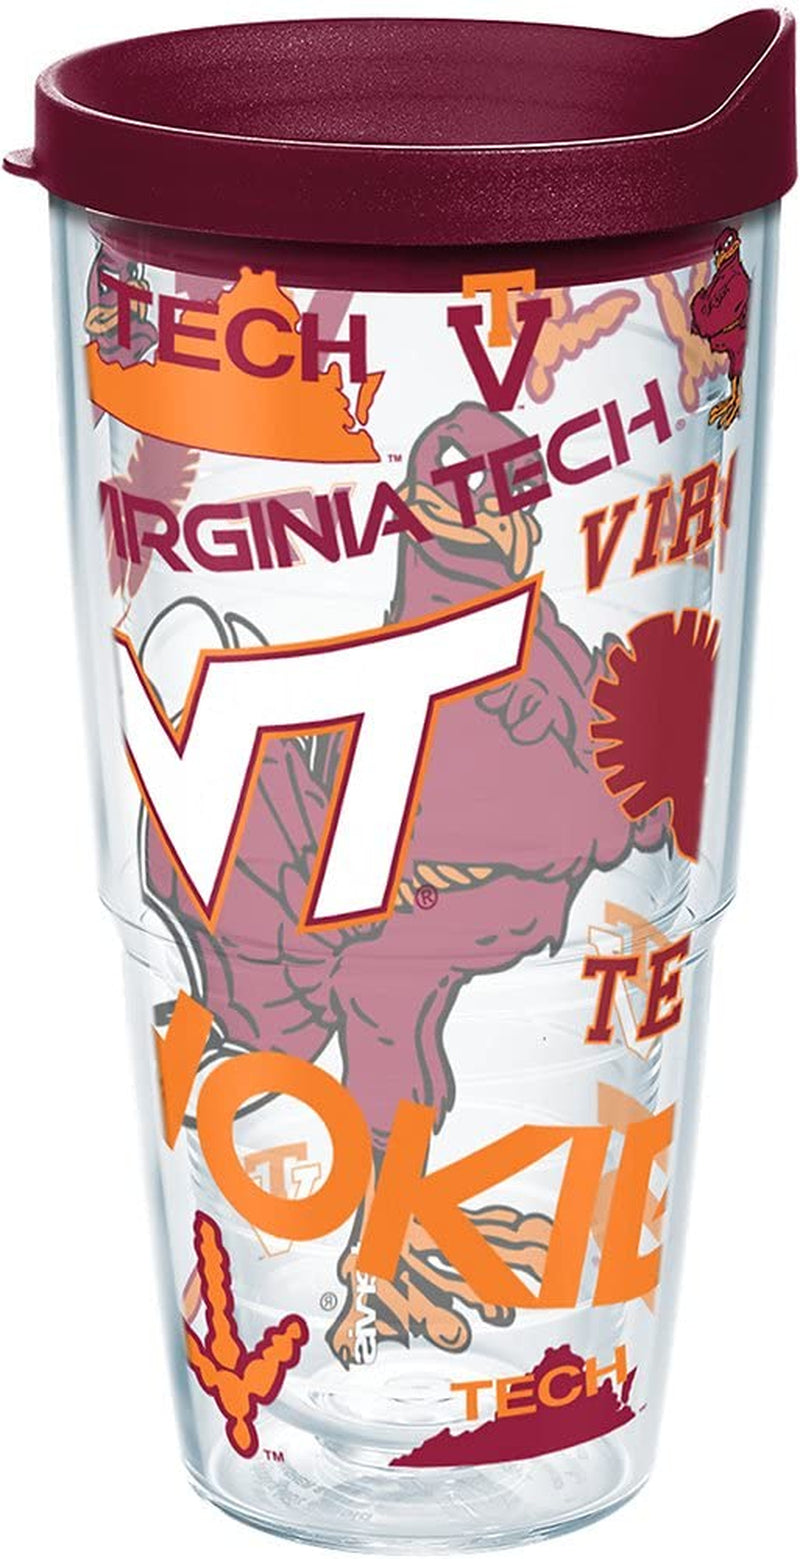 Tervis Virginia Tech University Hokies Made in USA Double Walled Insulated Tumbler, 1 Count (Pack of 1), Maroon Home & Garden > Kitchen & Dining > Tableware > Drinkware Tervis Maroon 24 oz 